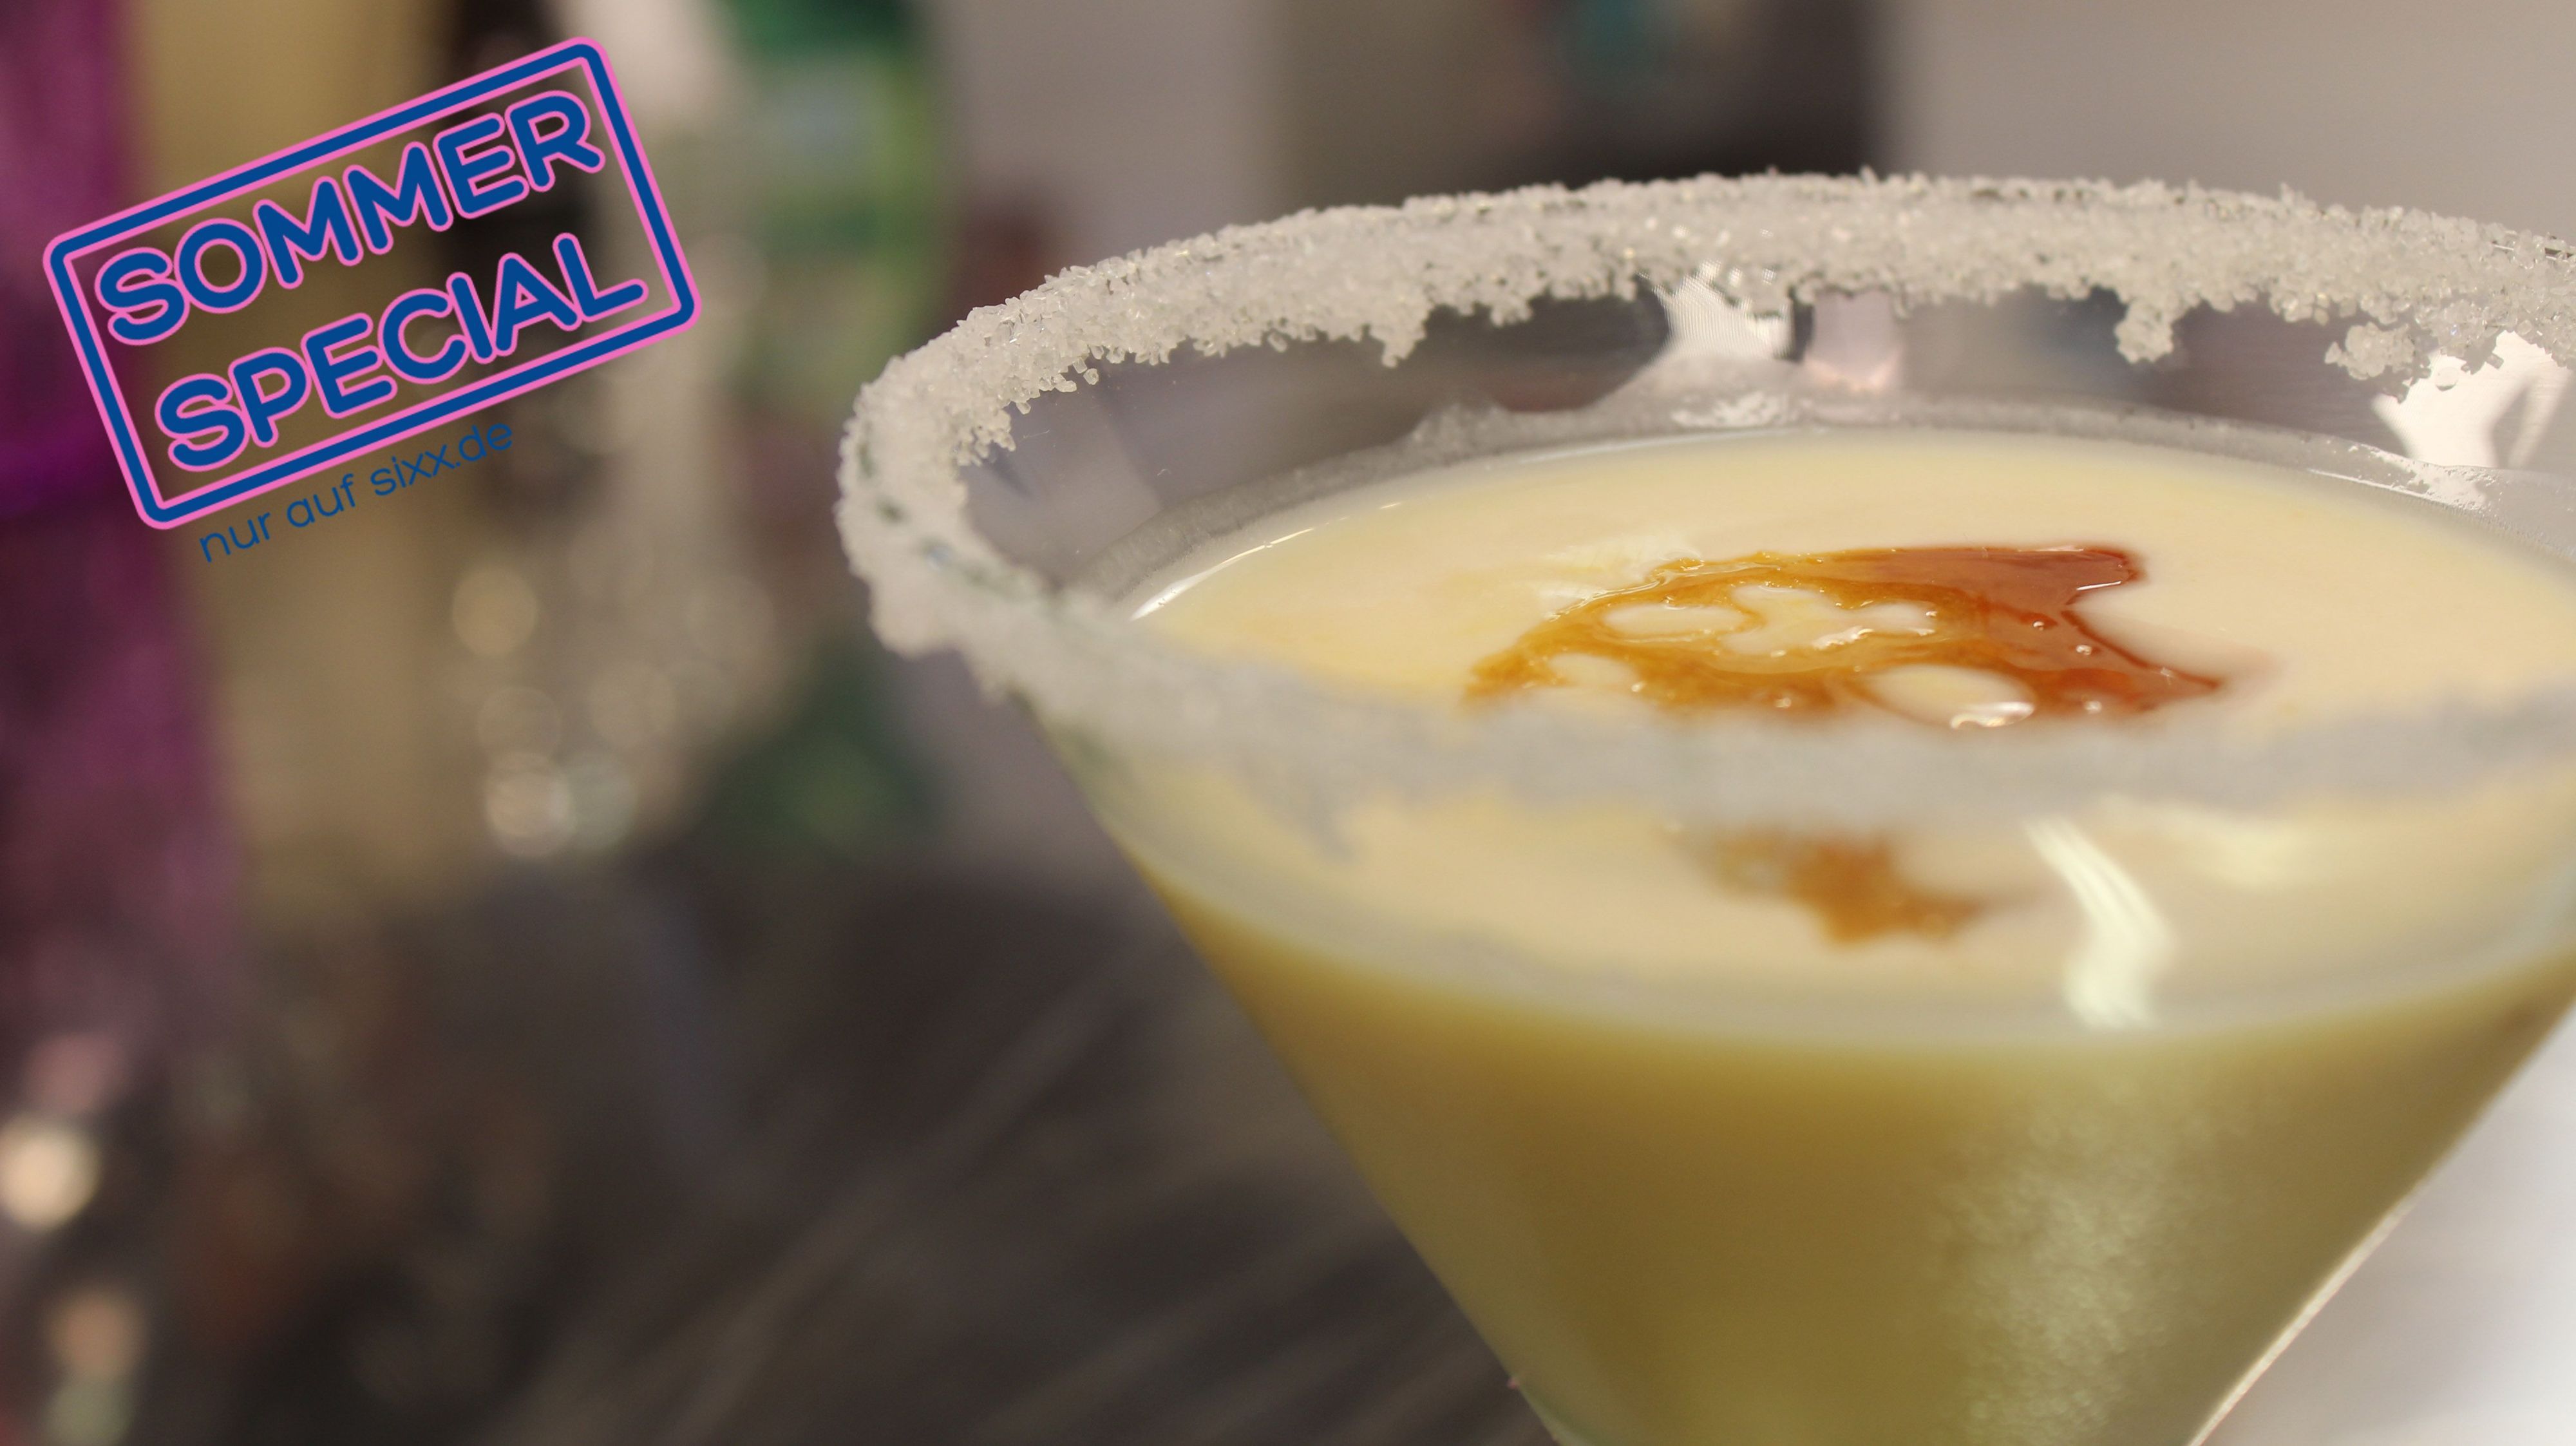 Enies Sommerspecial: Creme Brulee Martini